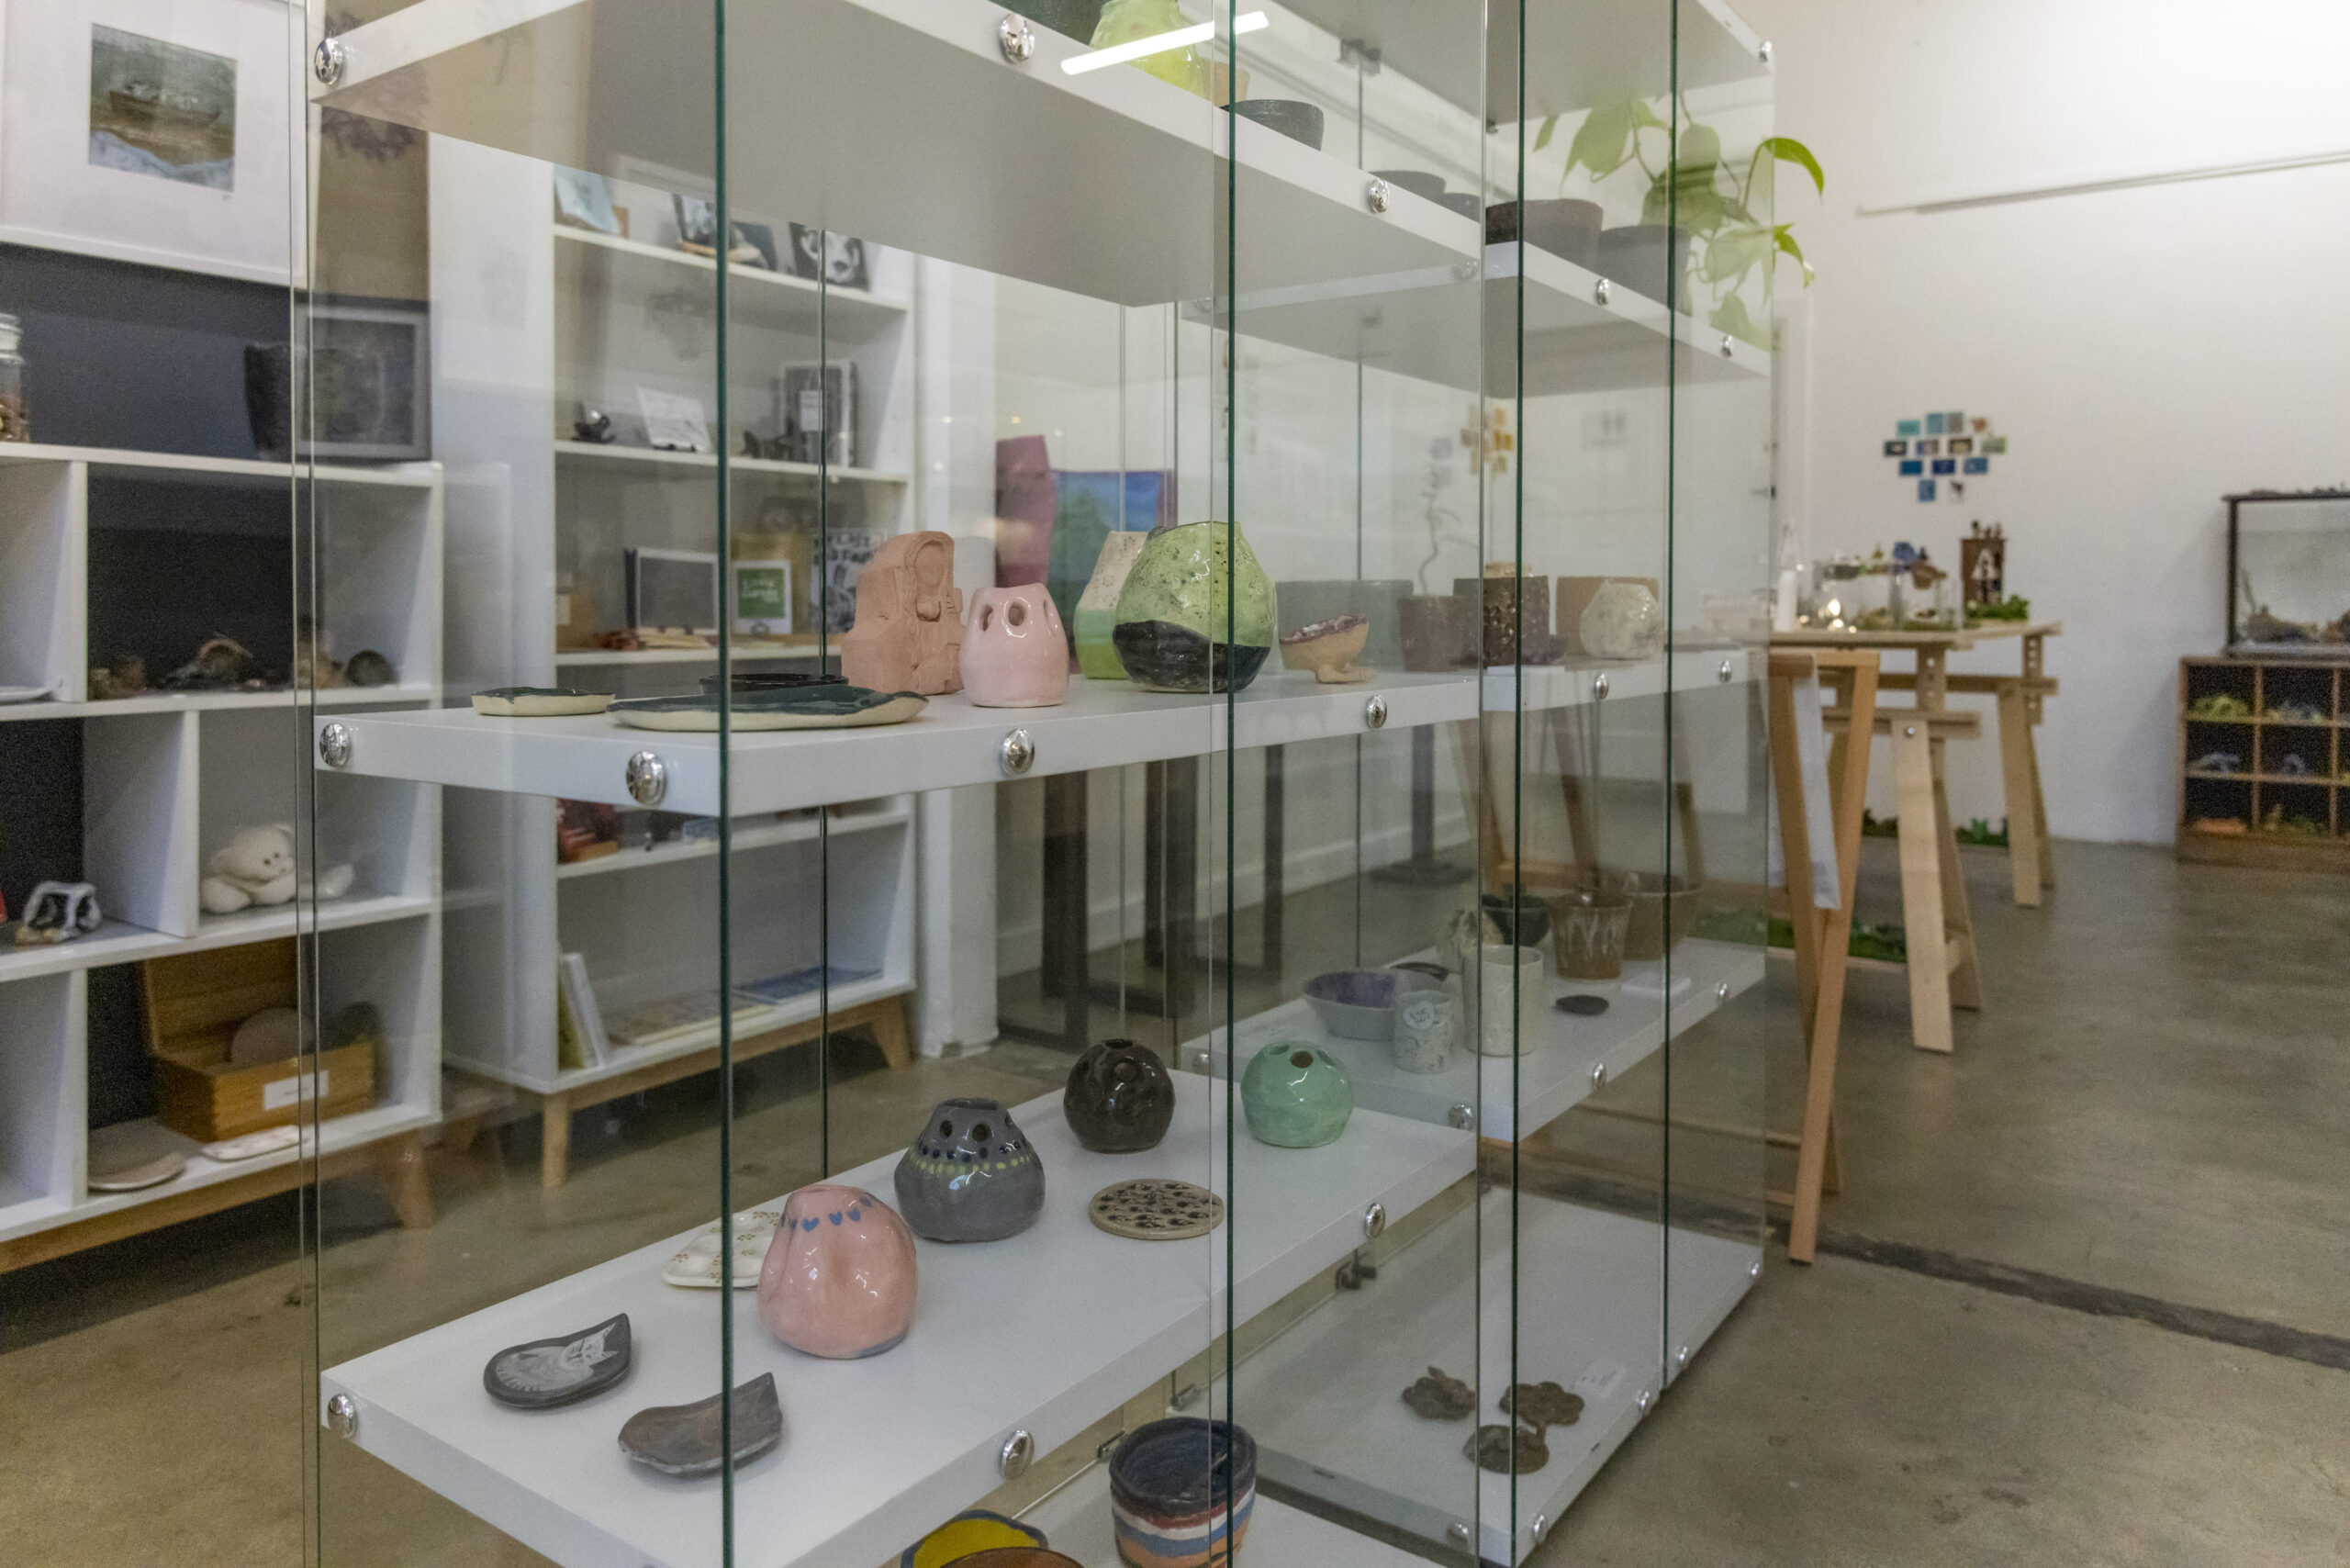 Image of the wonderful Artosaurus gallery shop space as part of their Artist Profile with Art Trails Tasmania